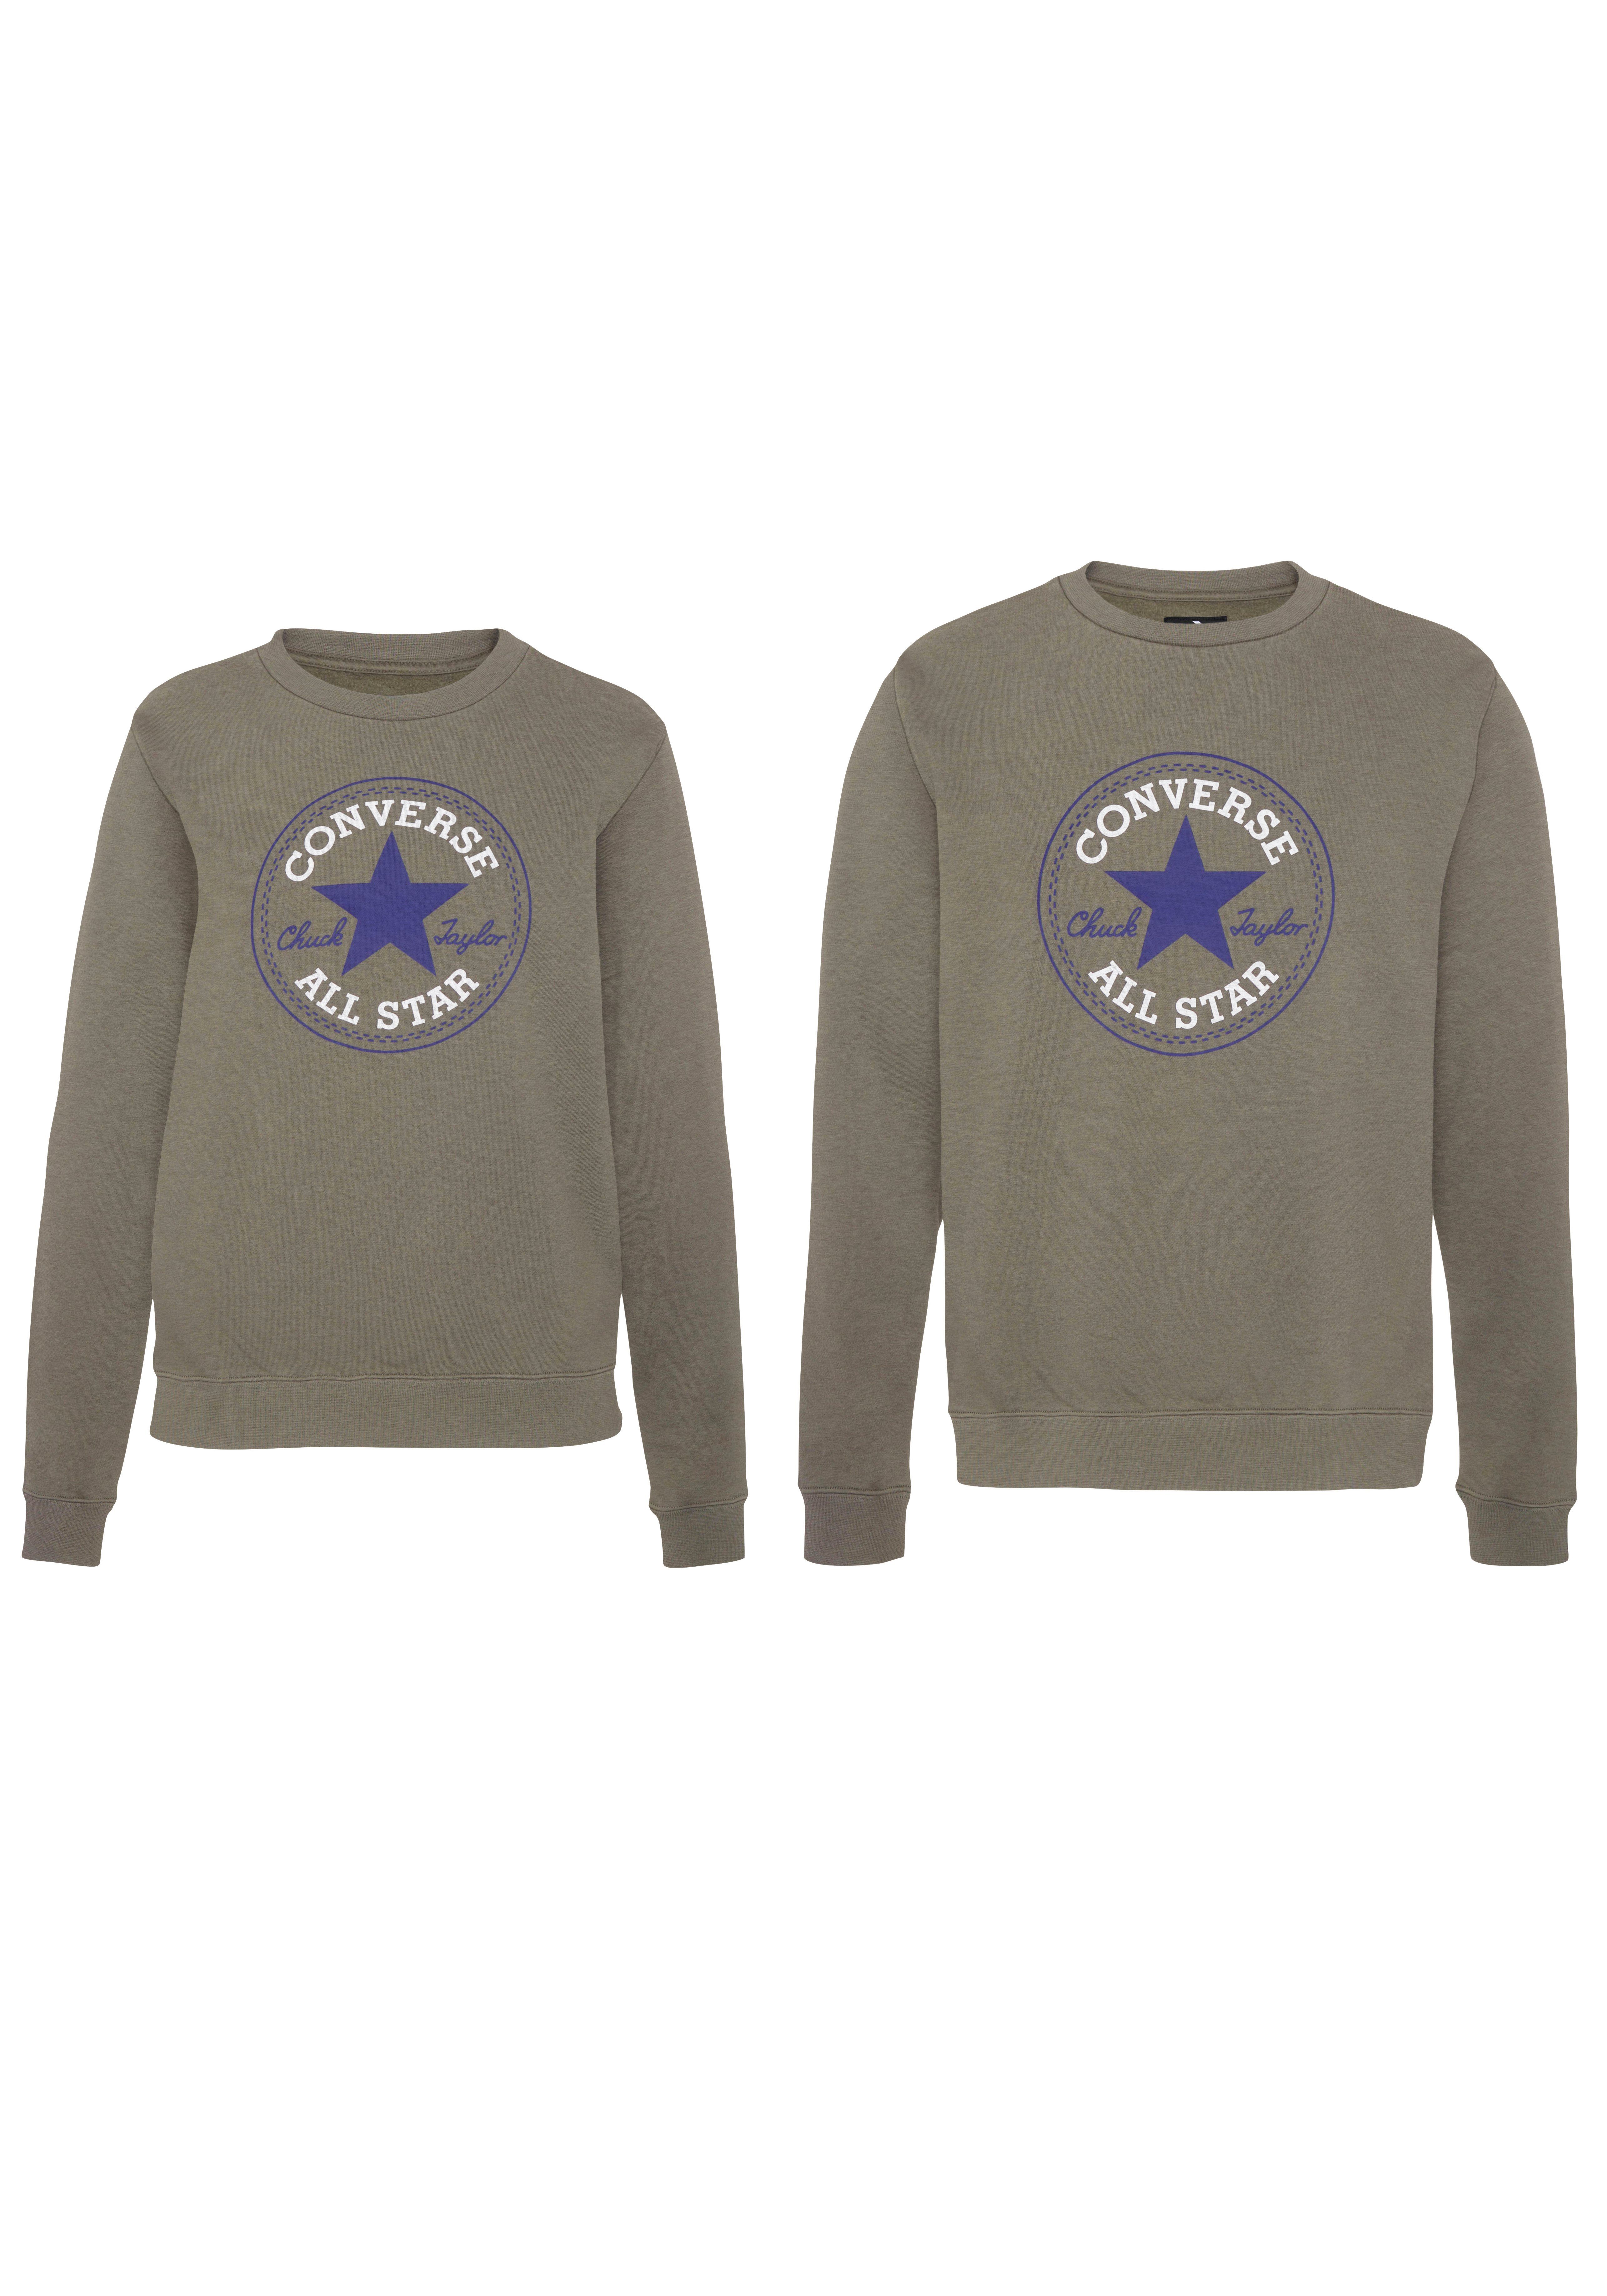 ALL UNISEX olive PATCH Converse STAR BRUSHED BACK Sweatshirt